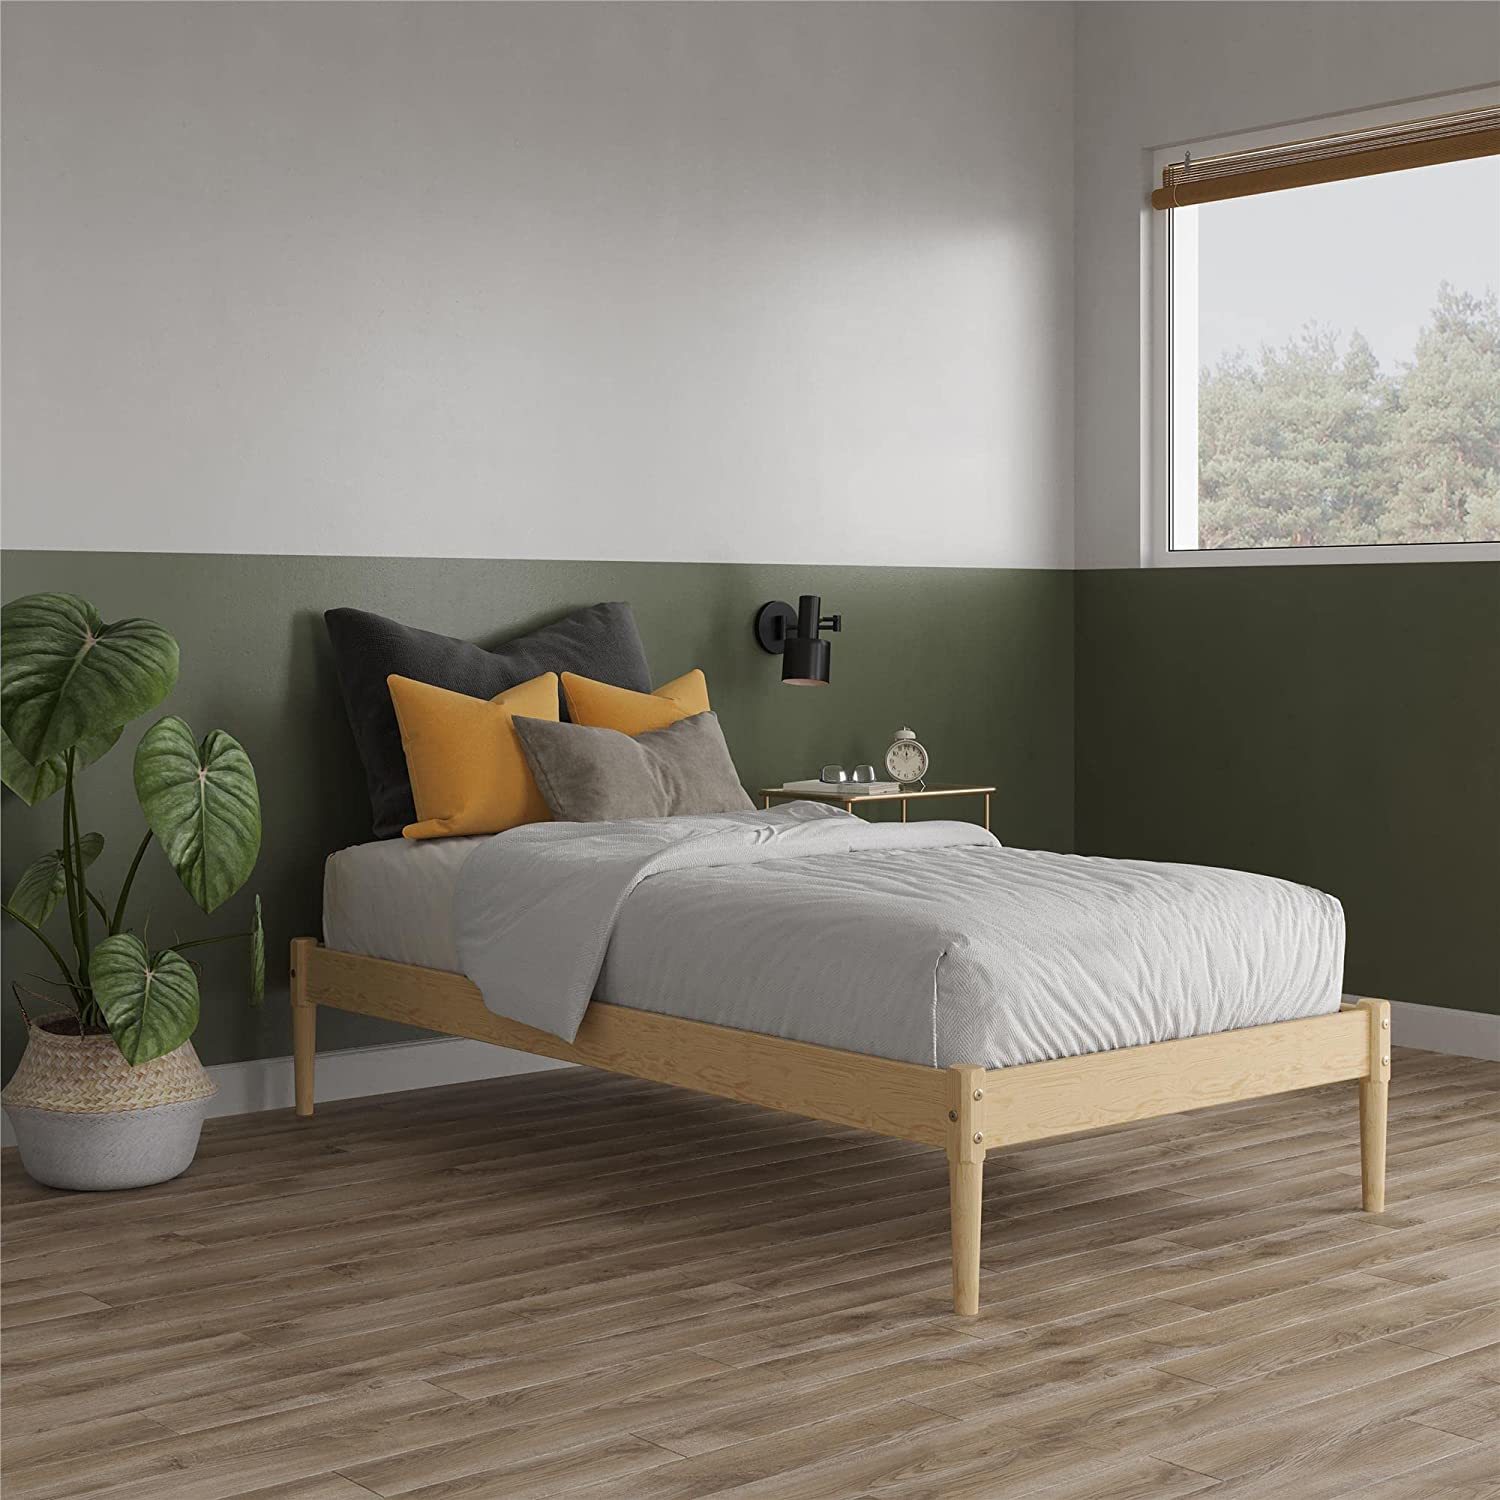 Twin-Size Dhp Lorriana 14" Solid Pine Wood Platform Bed Frame, Natural. - $155.99